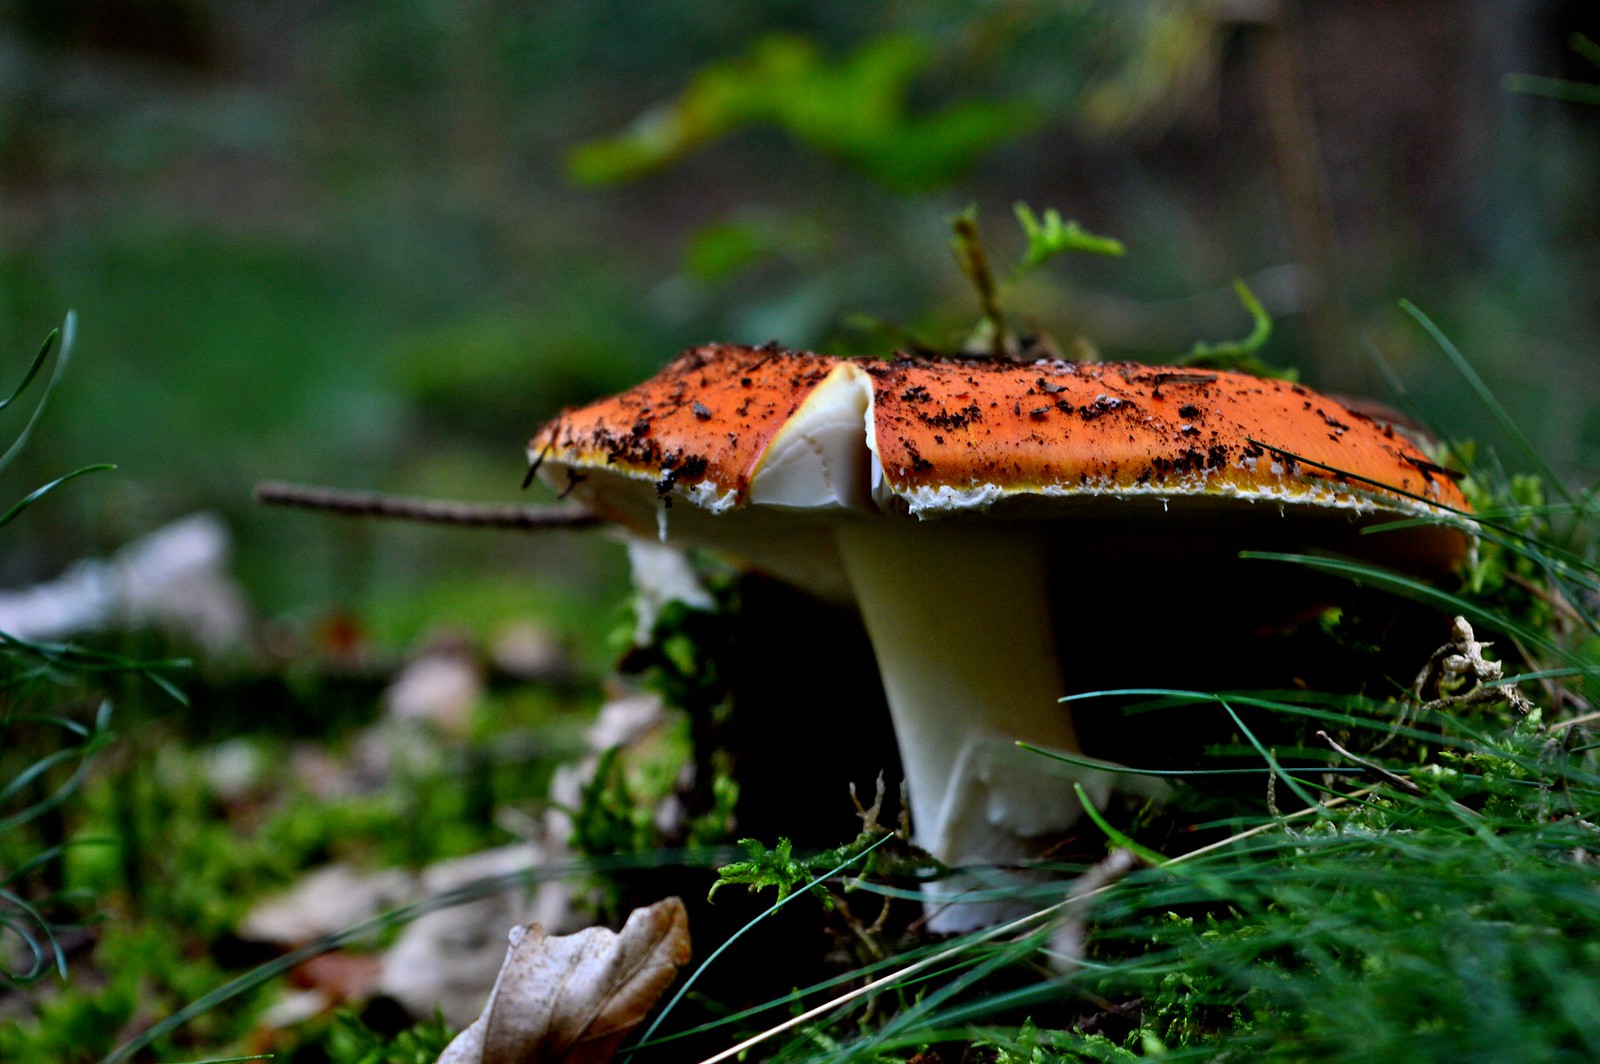 Fungi are typical for autumn.